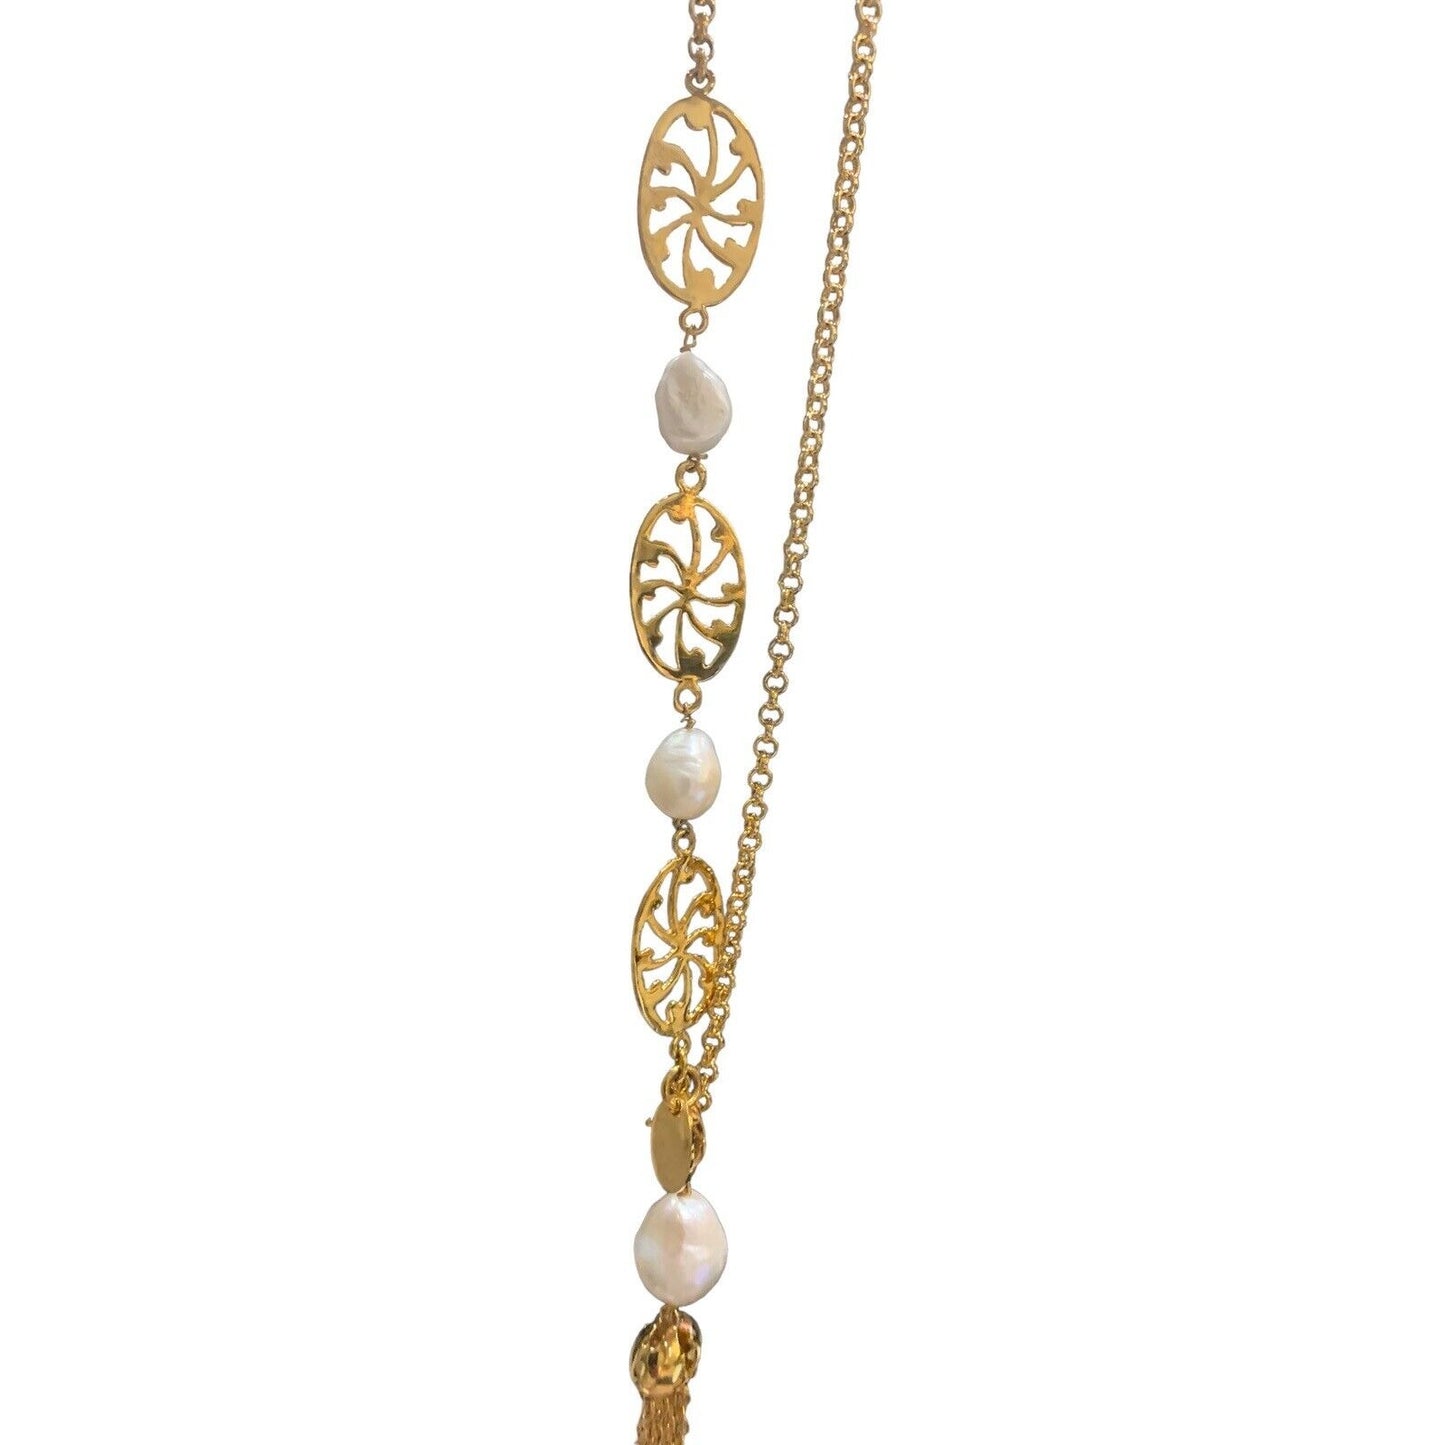 Canipelli Firenze Gold Plated Pearl and Medallion Necklace